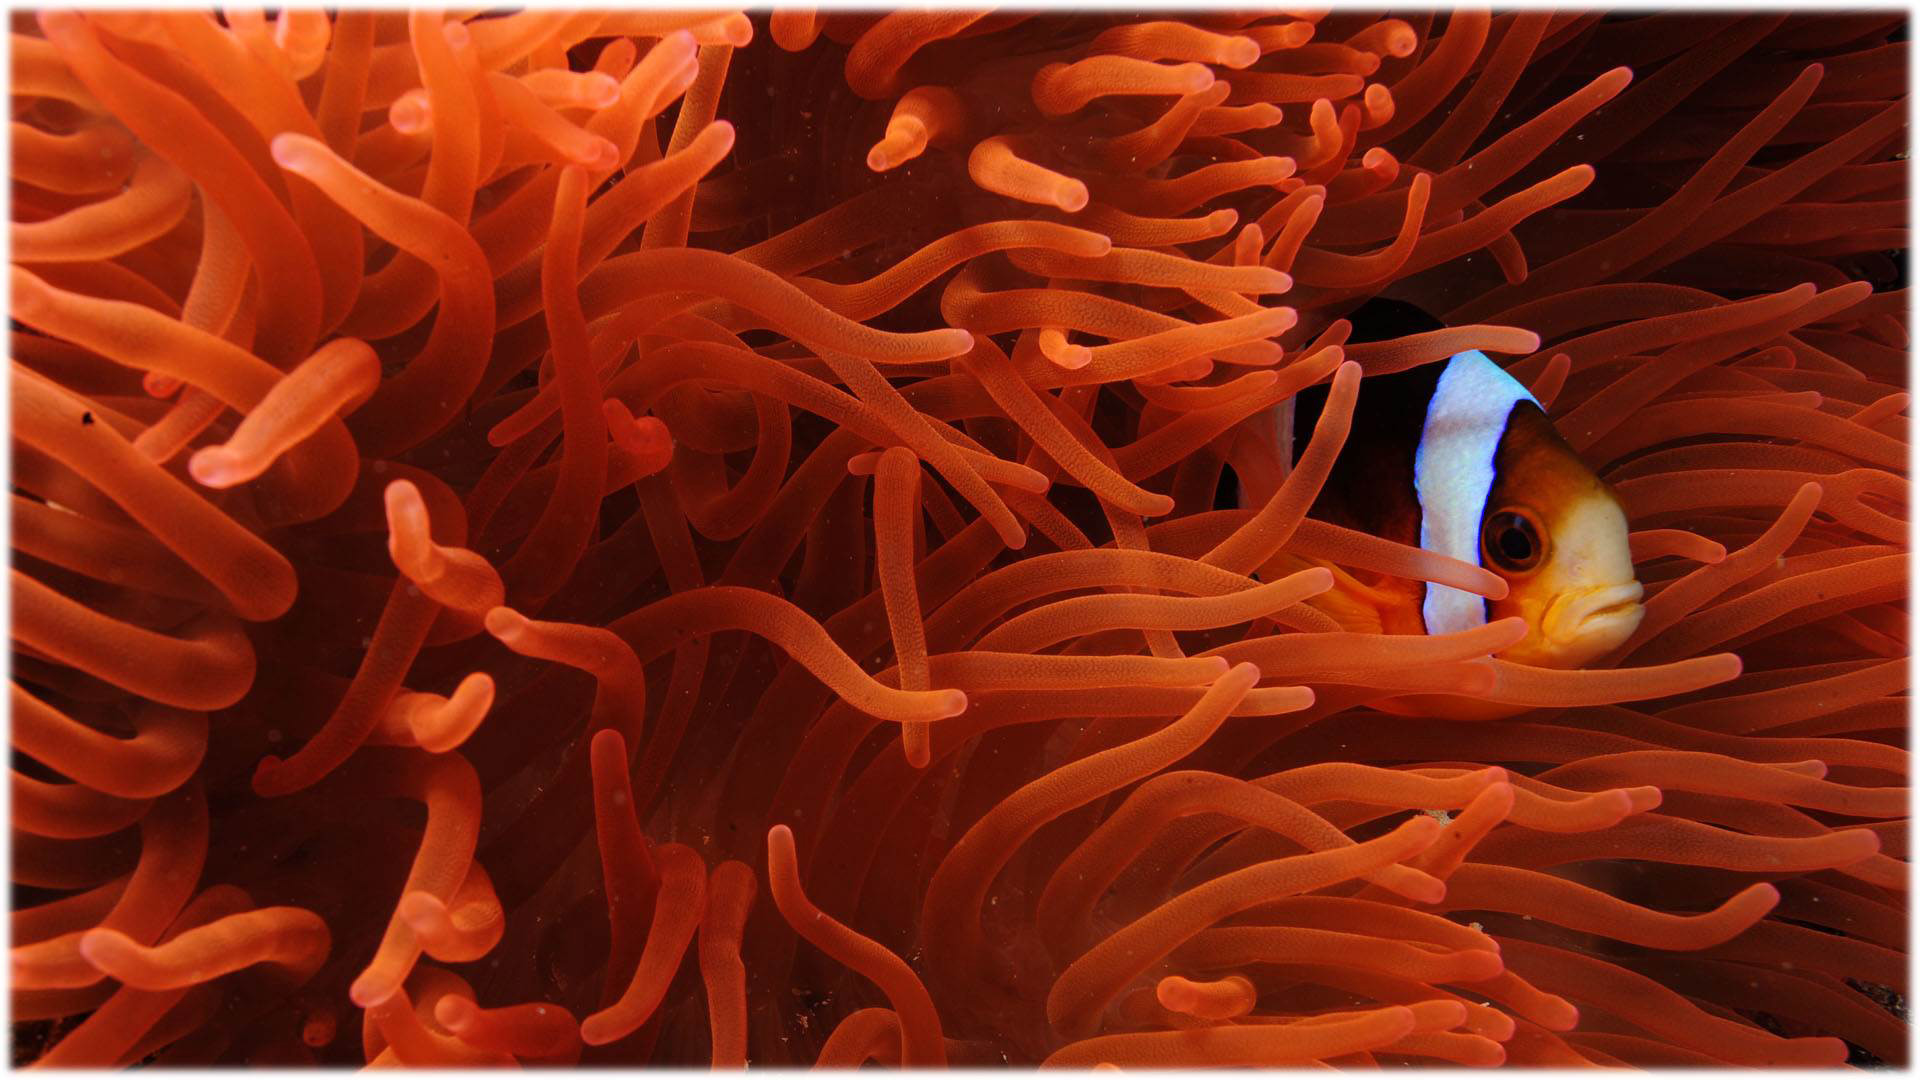 A clownfish among the stinging tentacles of an anemone